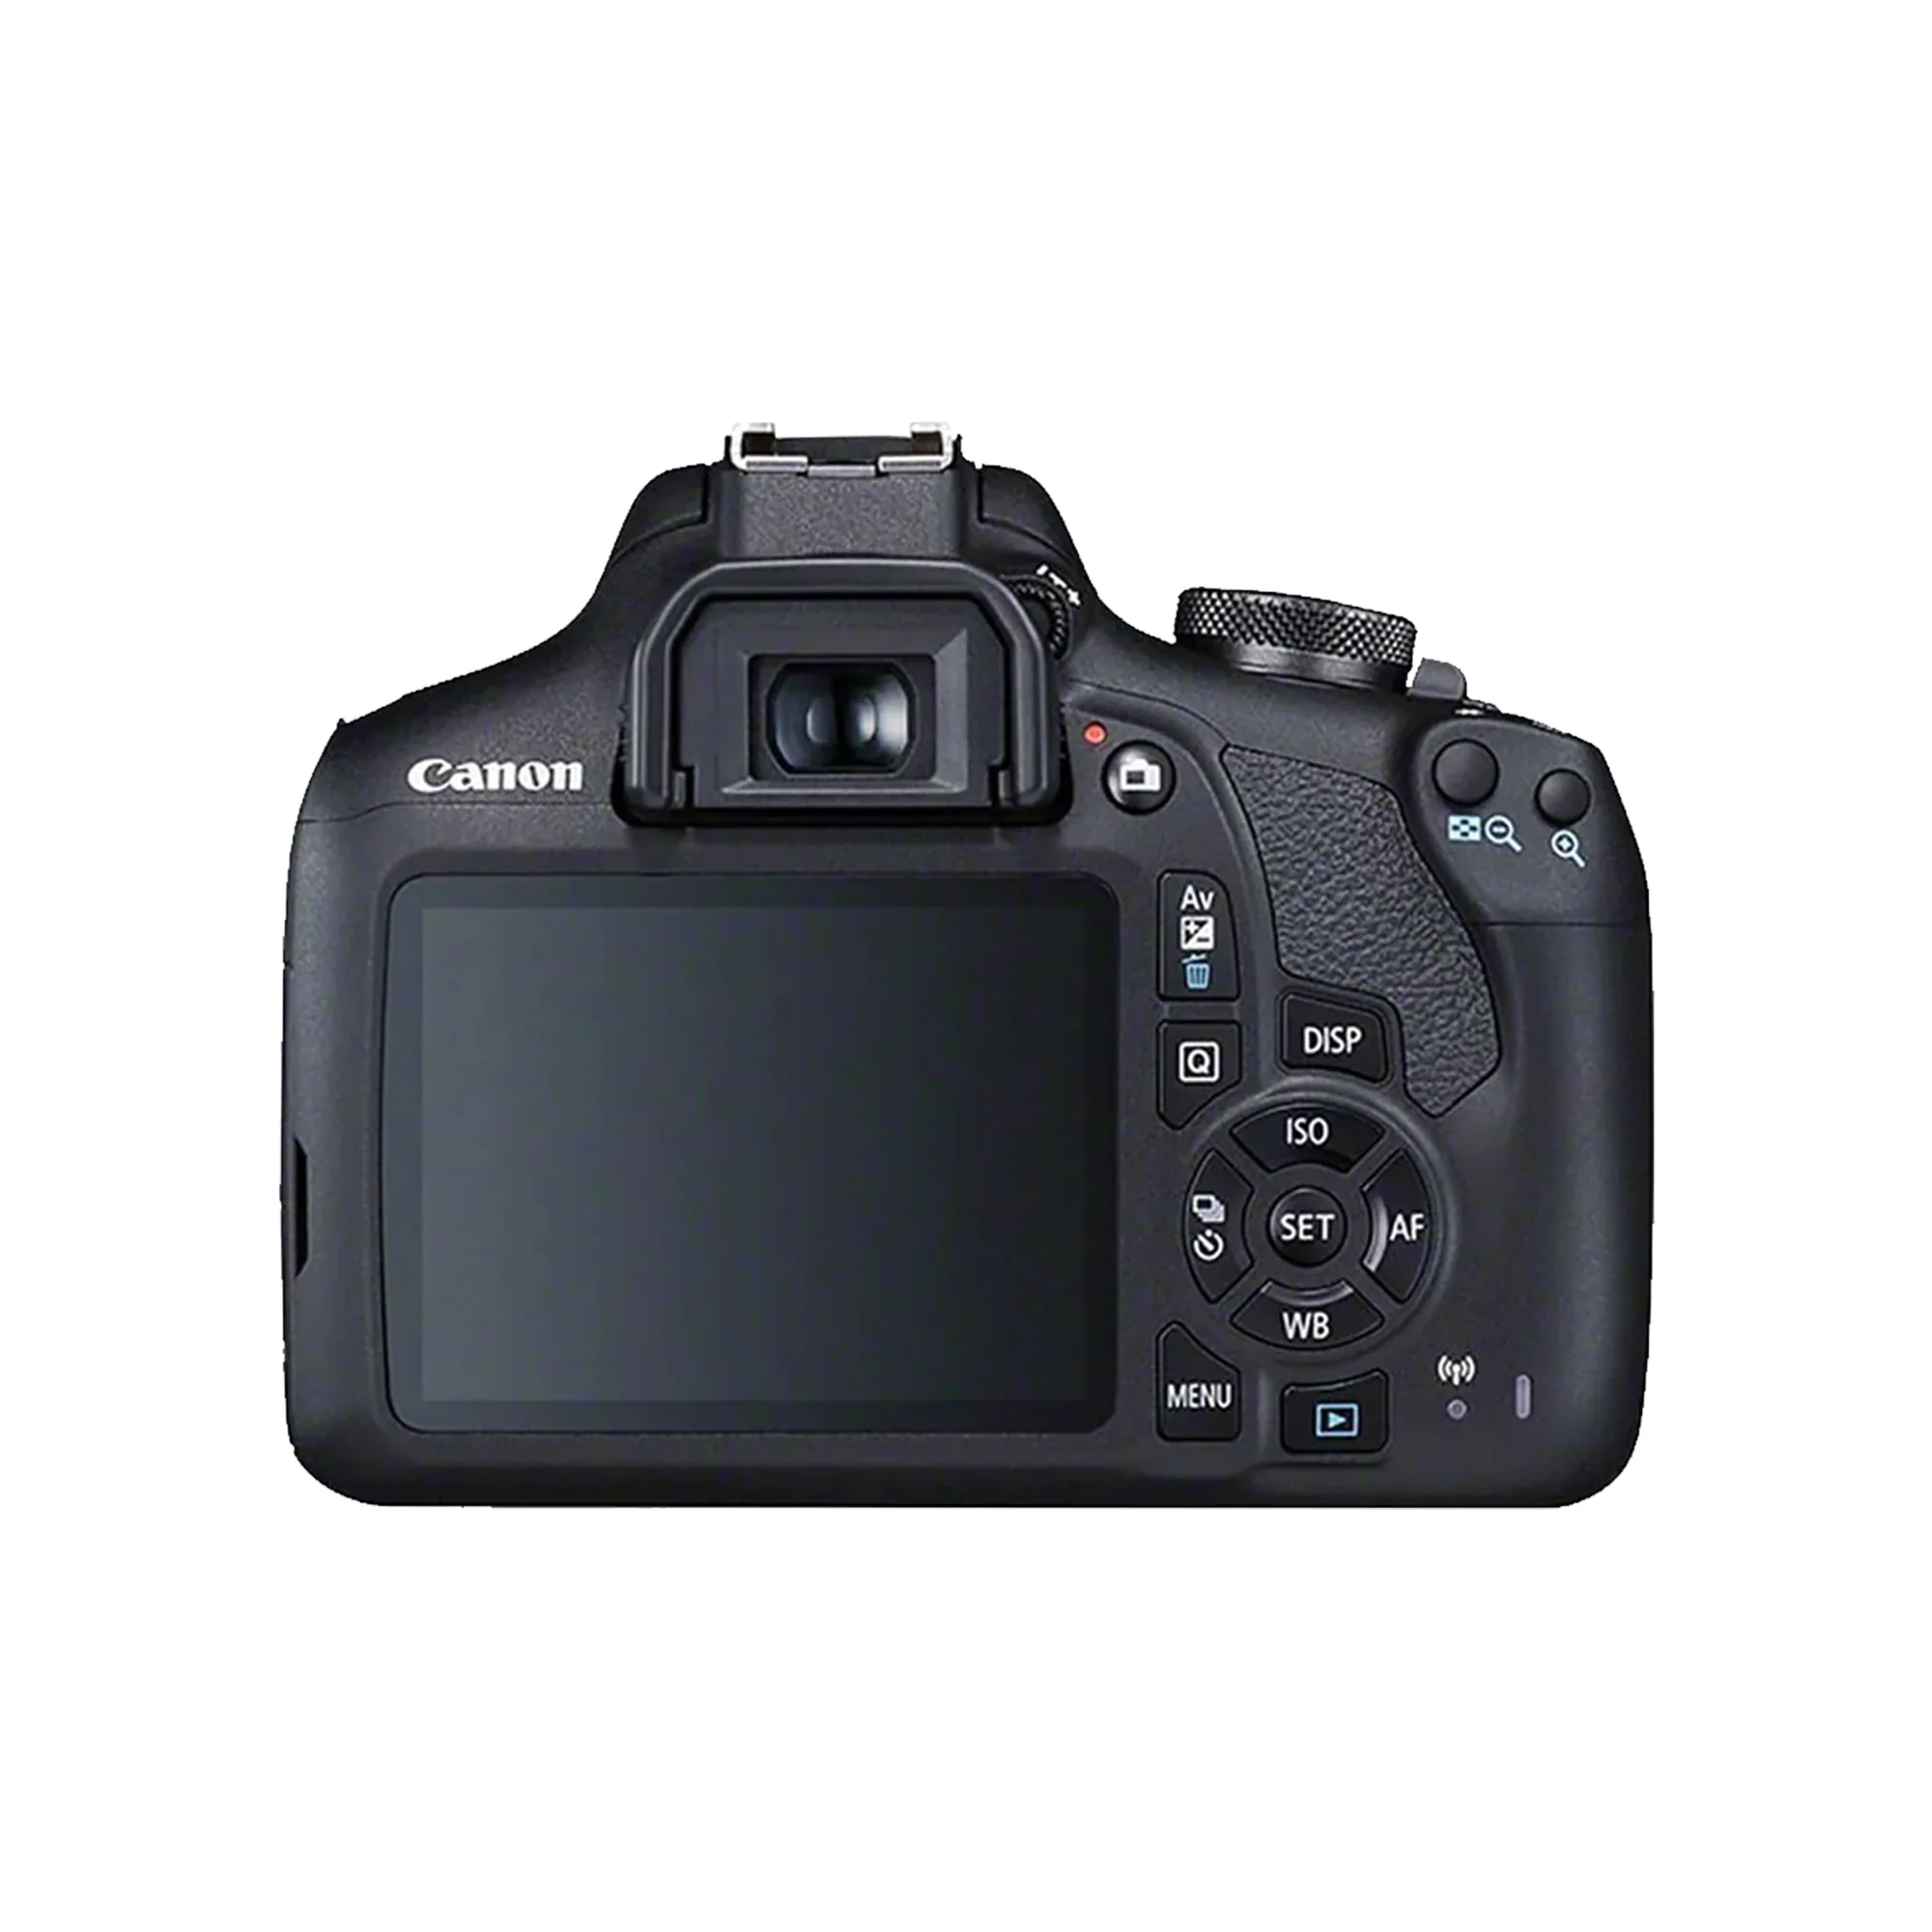 Canon 2000D Essential Travel Kit with 18-55mm DC Lens